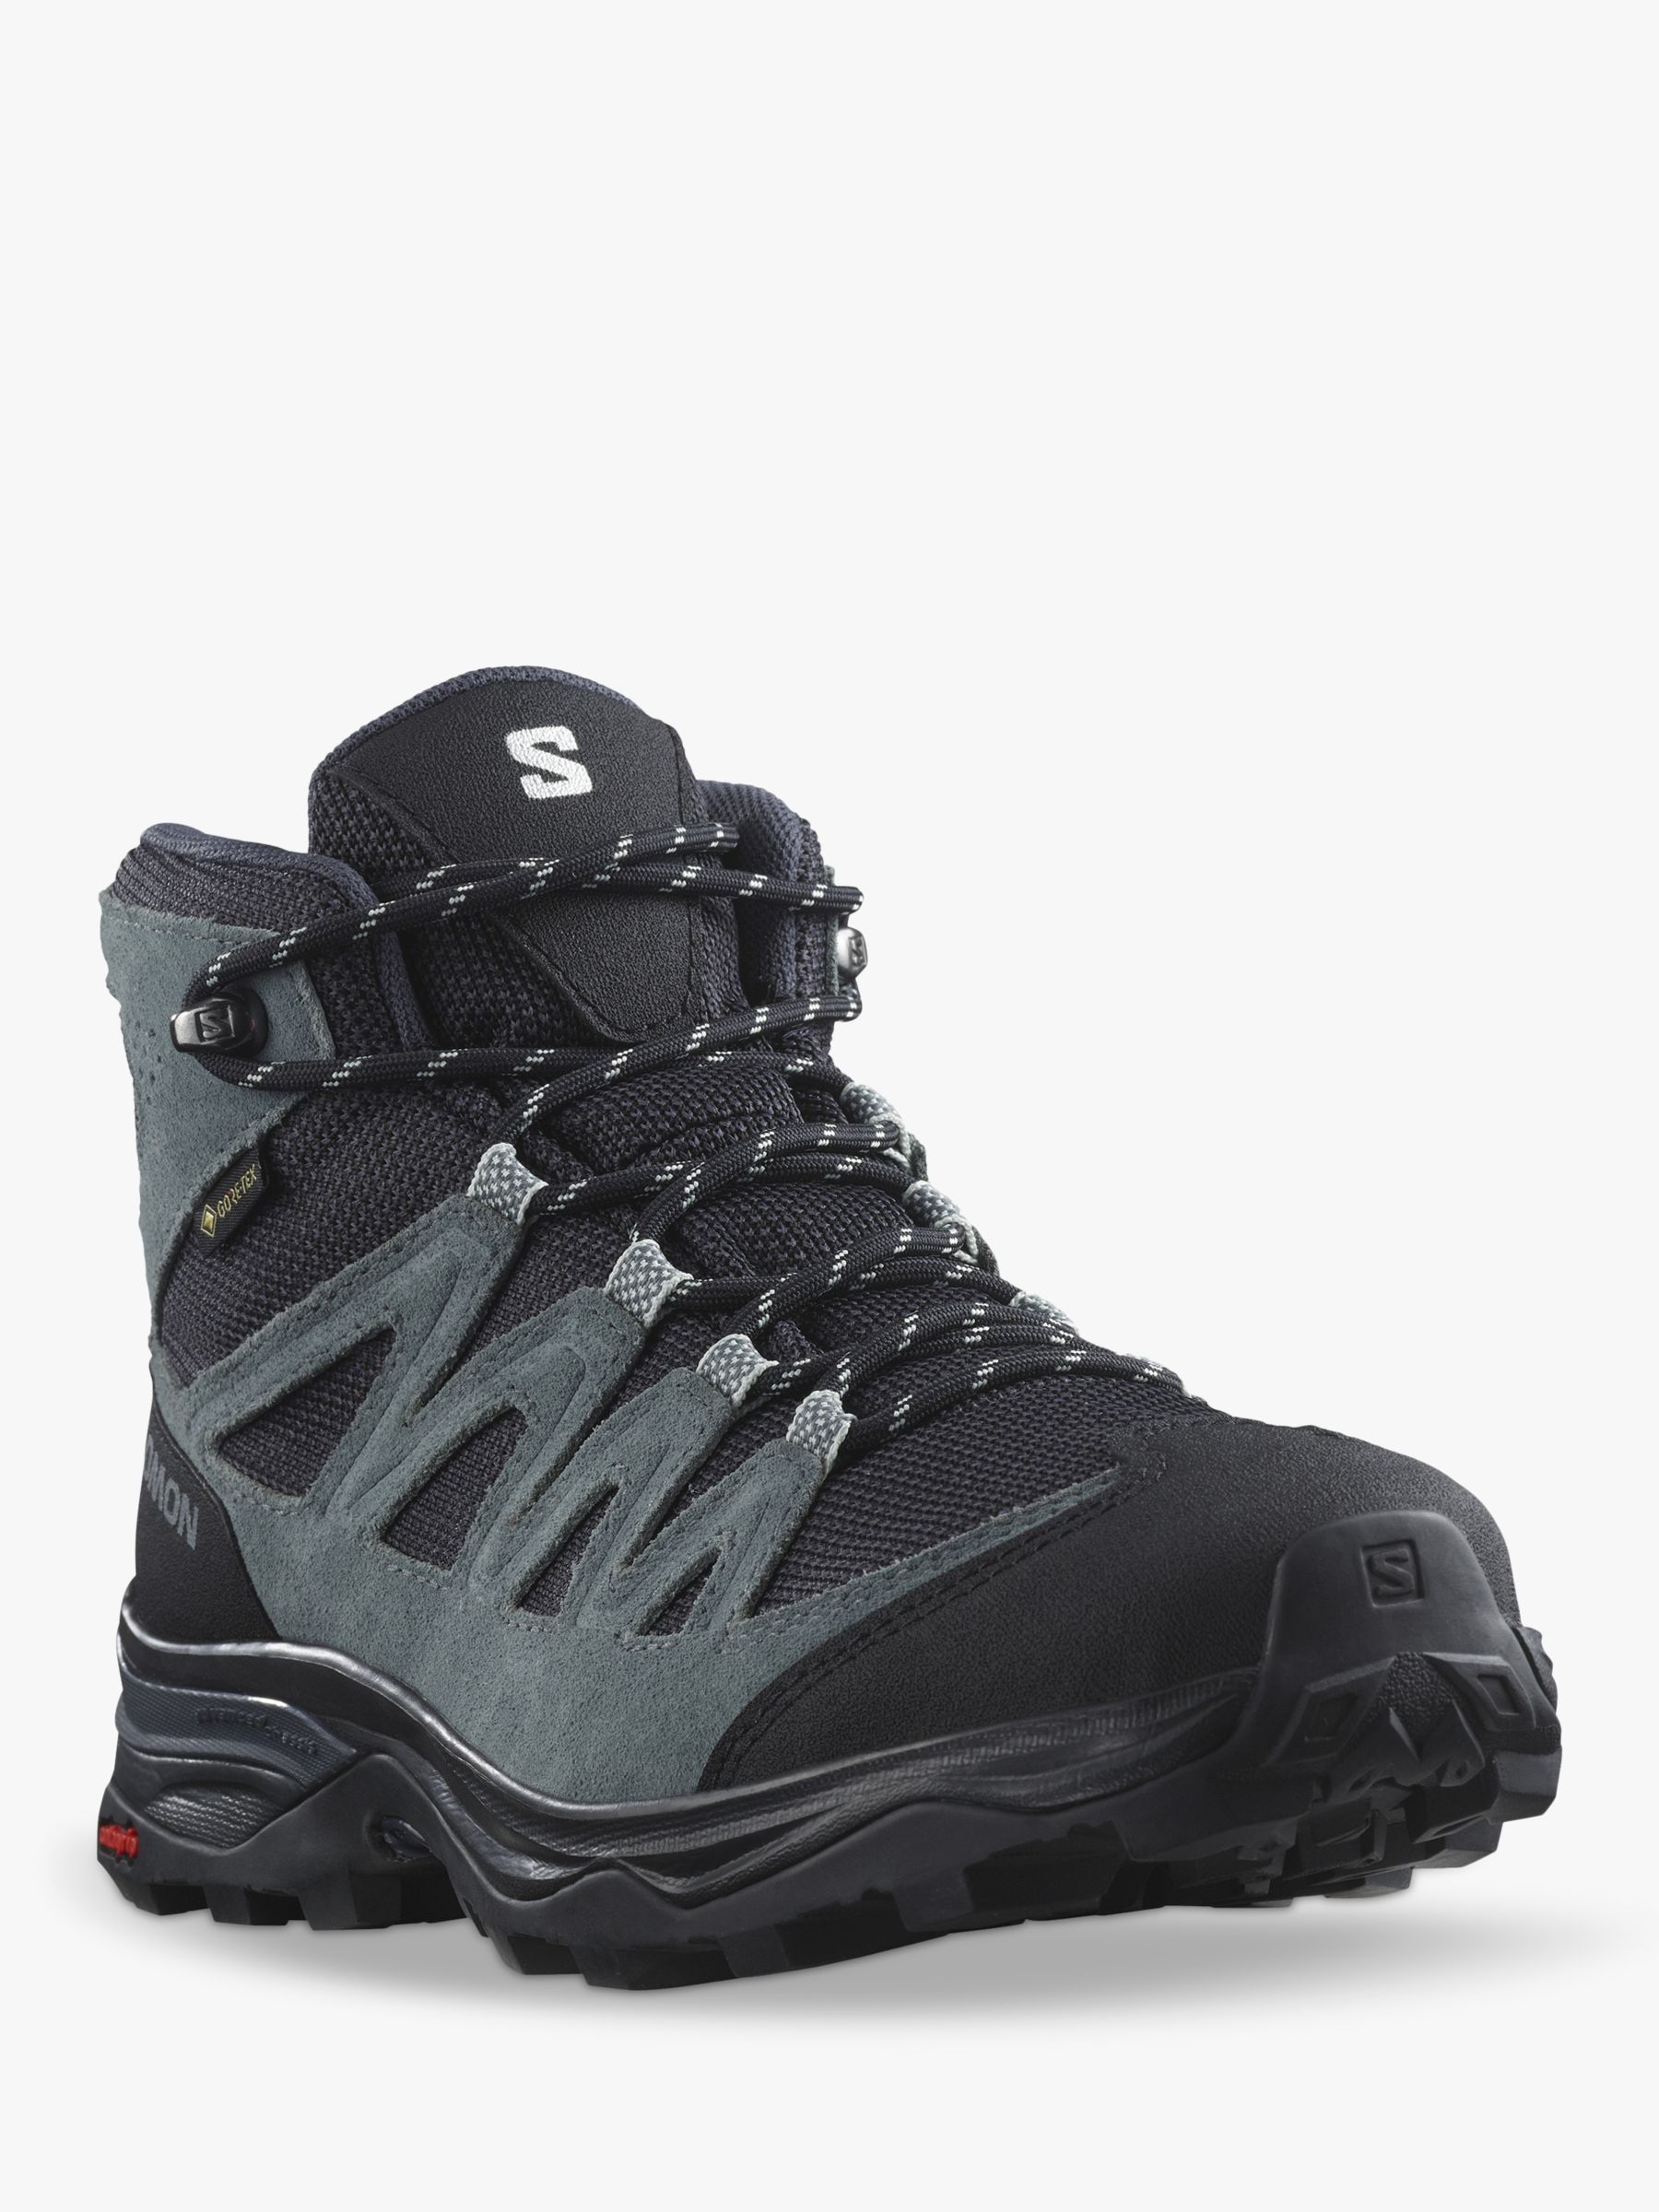 Buy Salomon X Ward Leather Gore-Tex Women's Trail Shoes, India Ink/Black Online at johnlewis.com